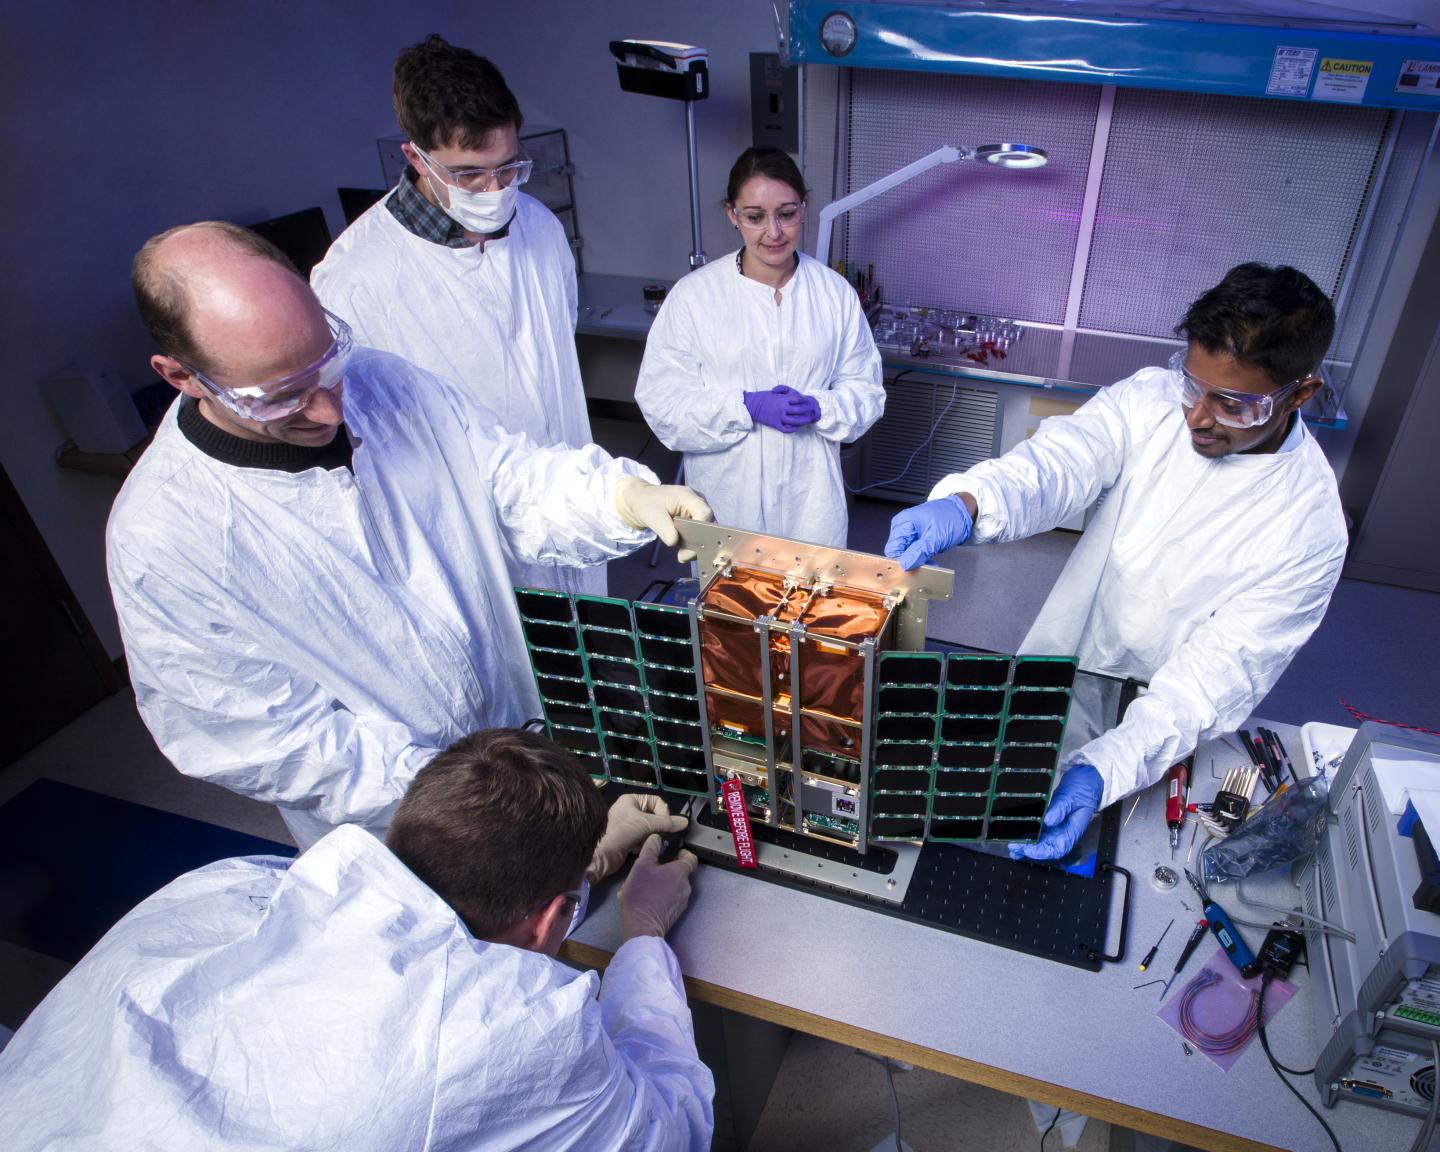 Technologists Integrate Instrument into Cubesat